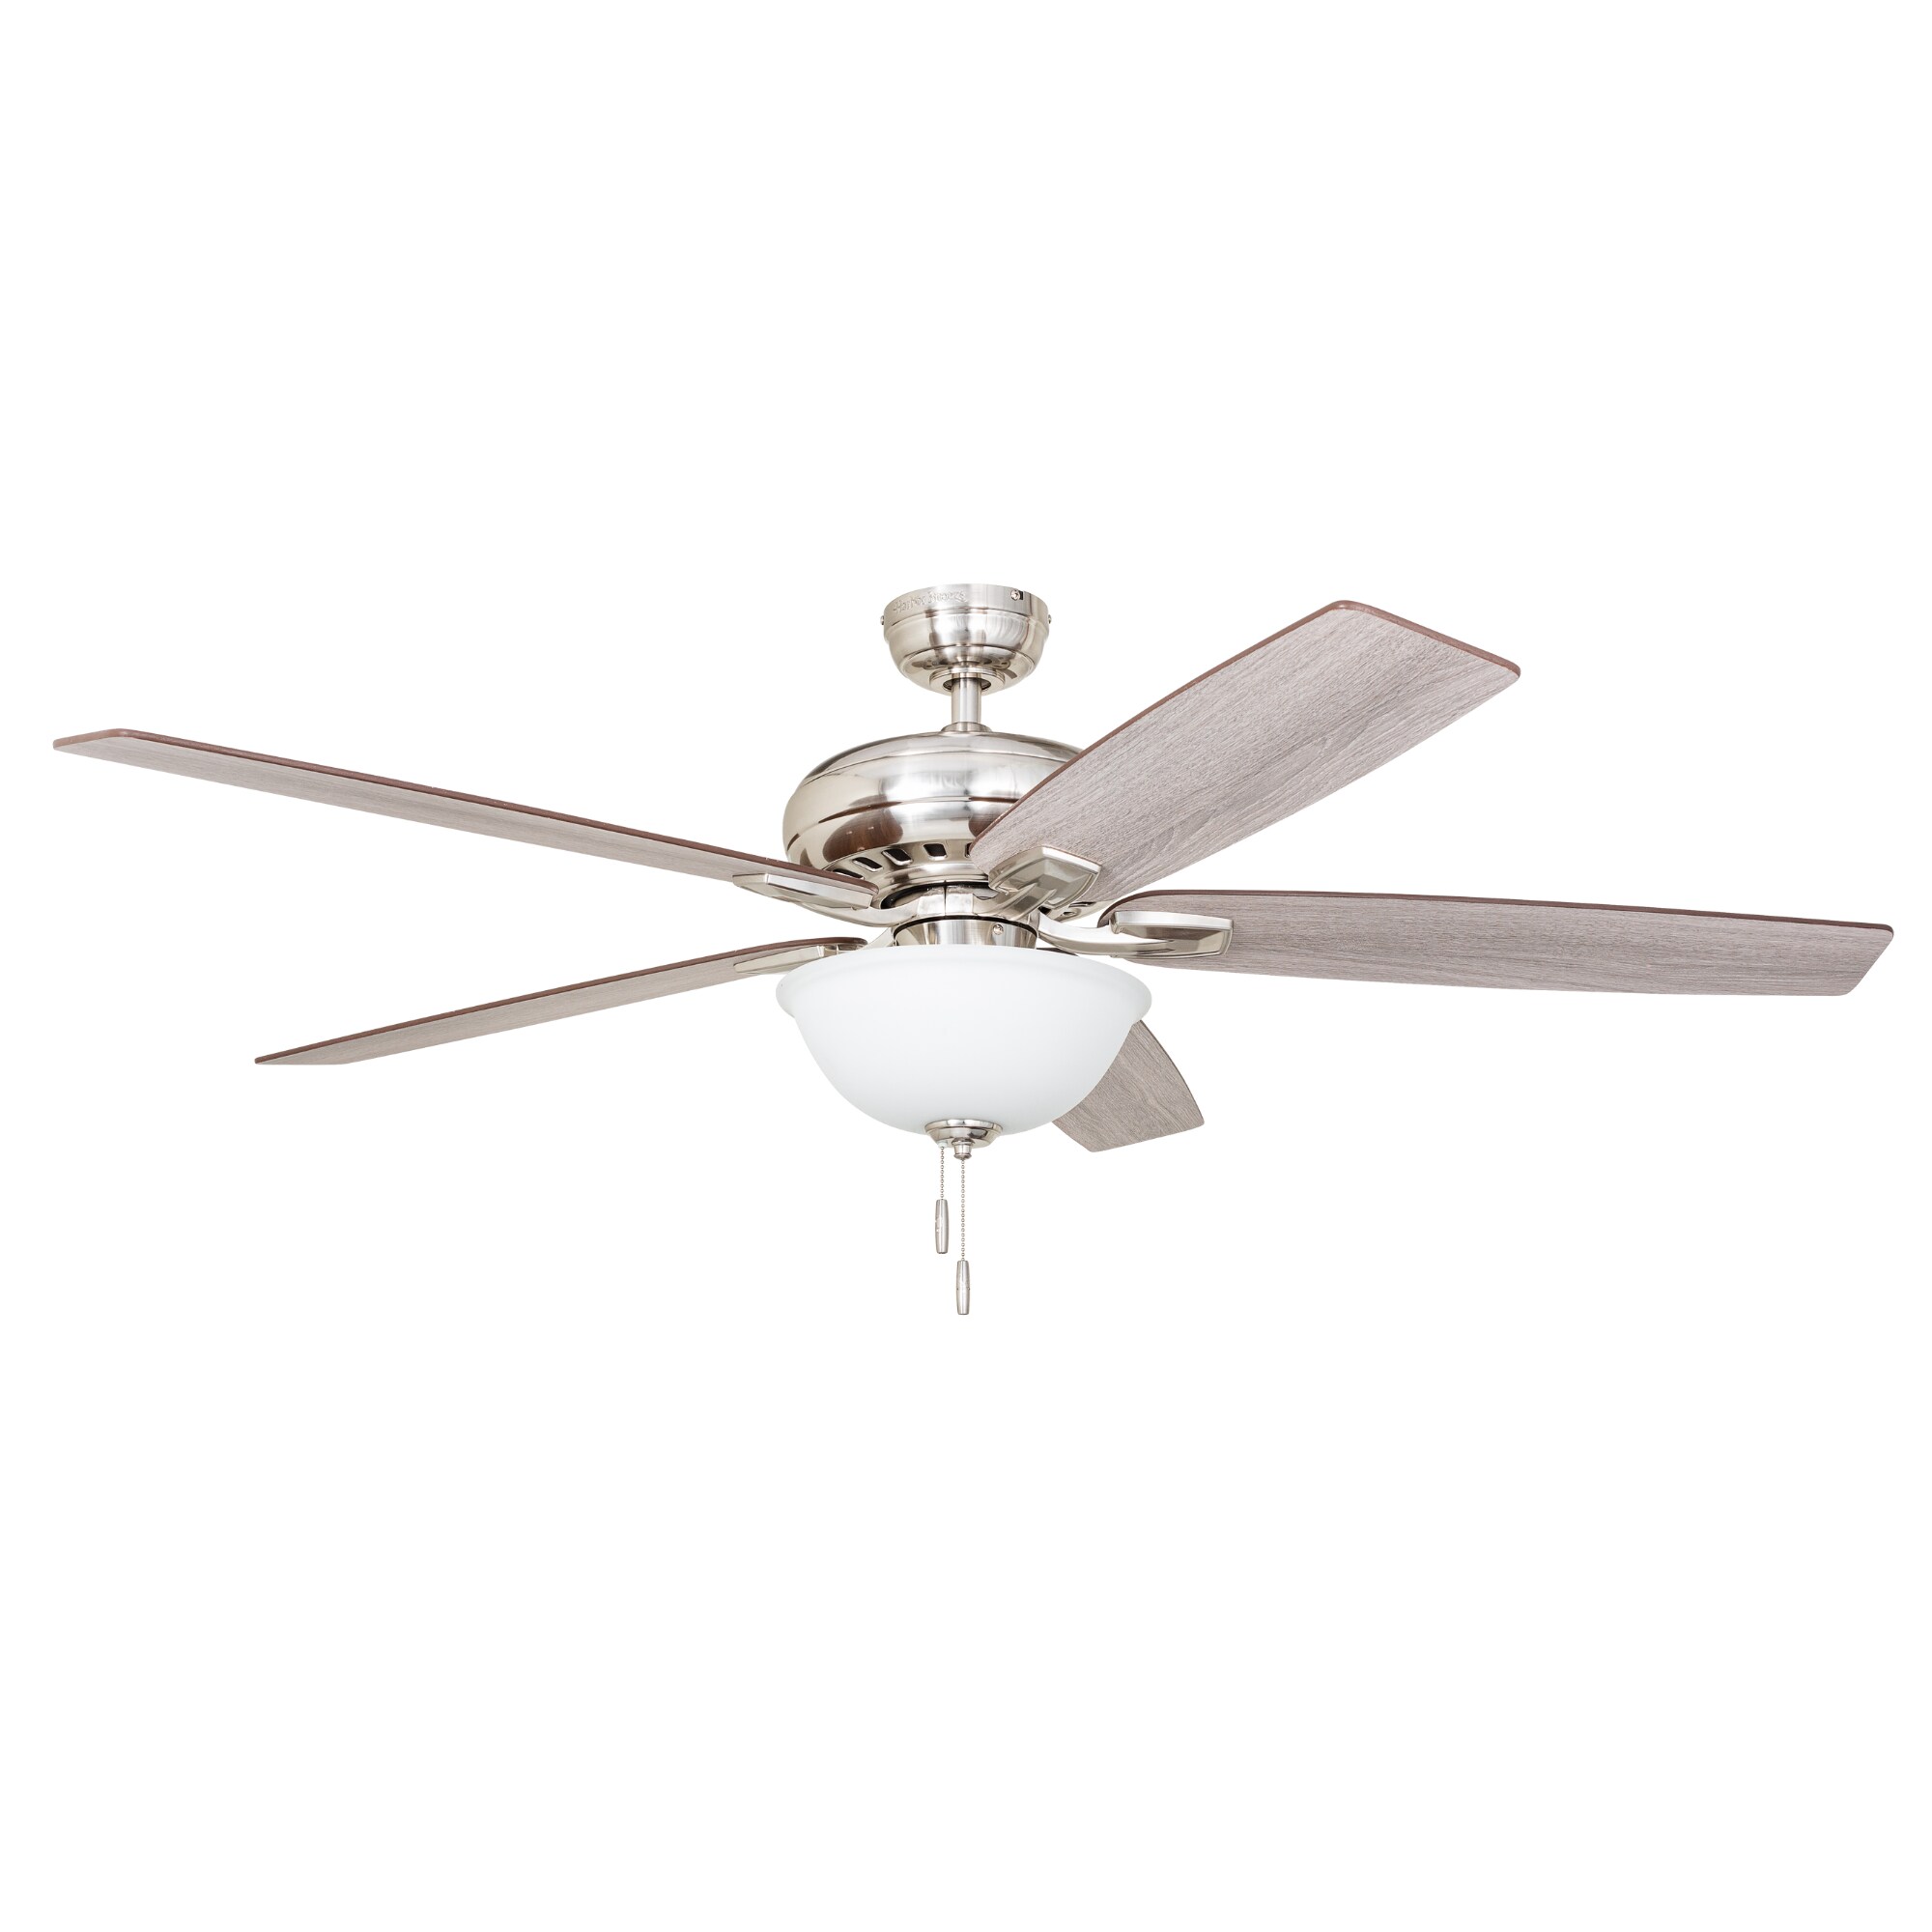 White Fixture with Five Reversible Blades Light Fixture Not Included Inc. 52-Inch Light Wood White Ceiling Fan Hyperikon Remote Control Ceiling Fan 